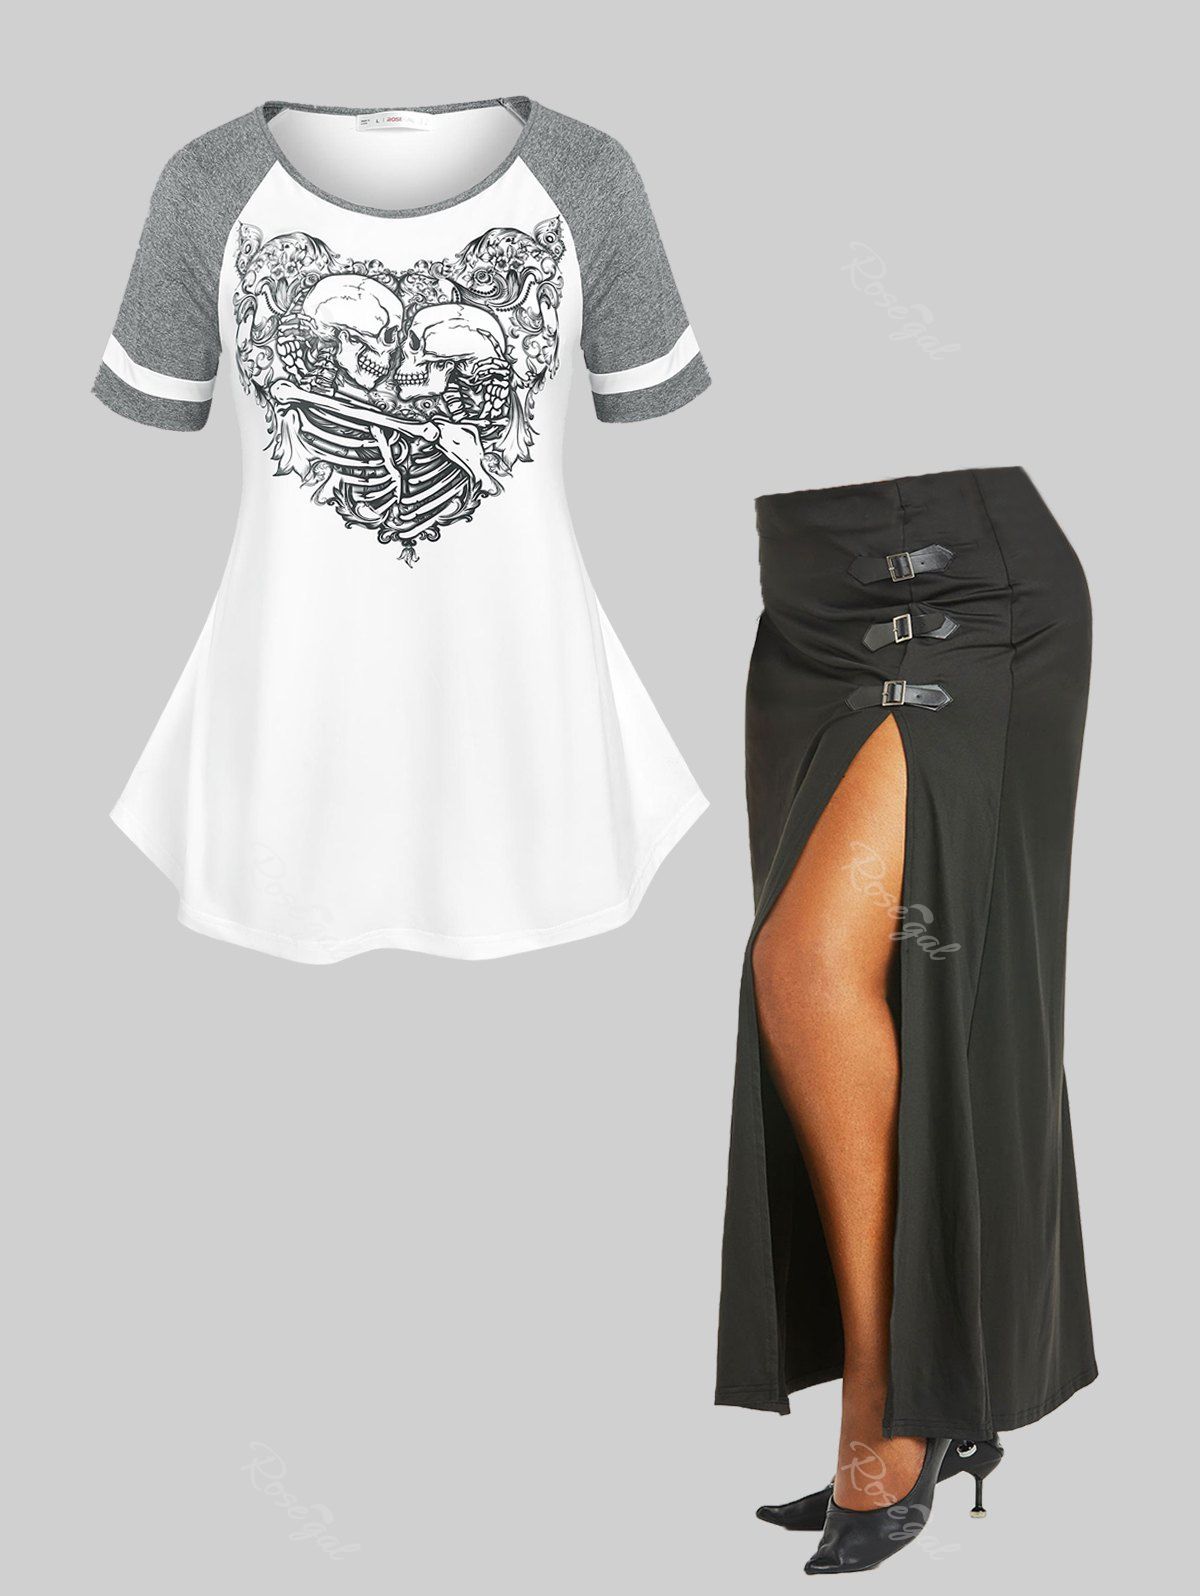 New Gothic Raglan Sleeve Skeleton Tee and Ruched Buckled Skirt Plus Size Summer Outfit  